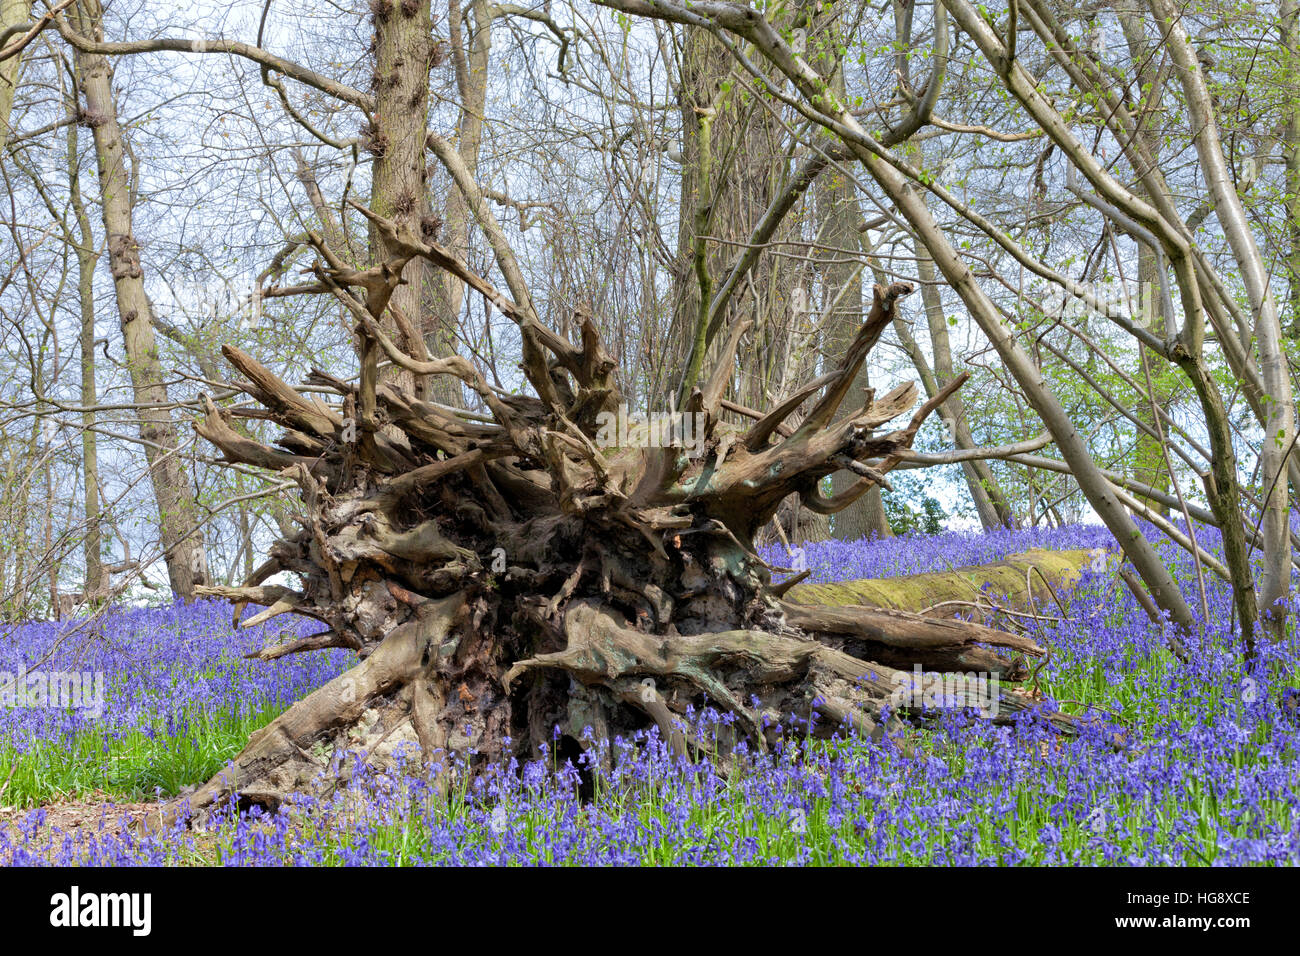 Fallen tree with exposed tangled roots on a carpet of purple bluebells, in a spring woodland, Kent, England Stock Photo